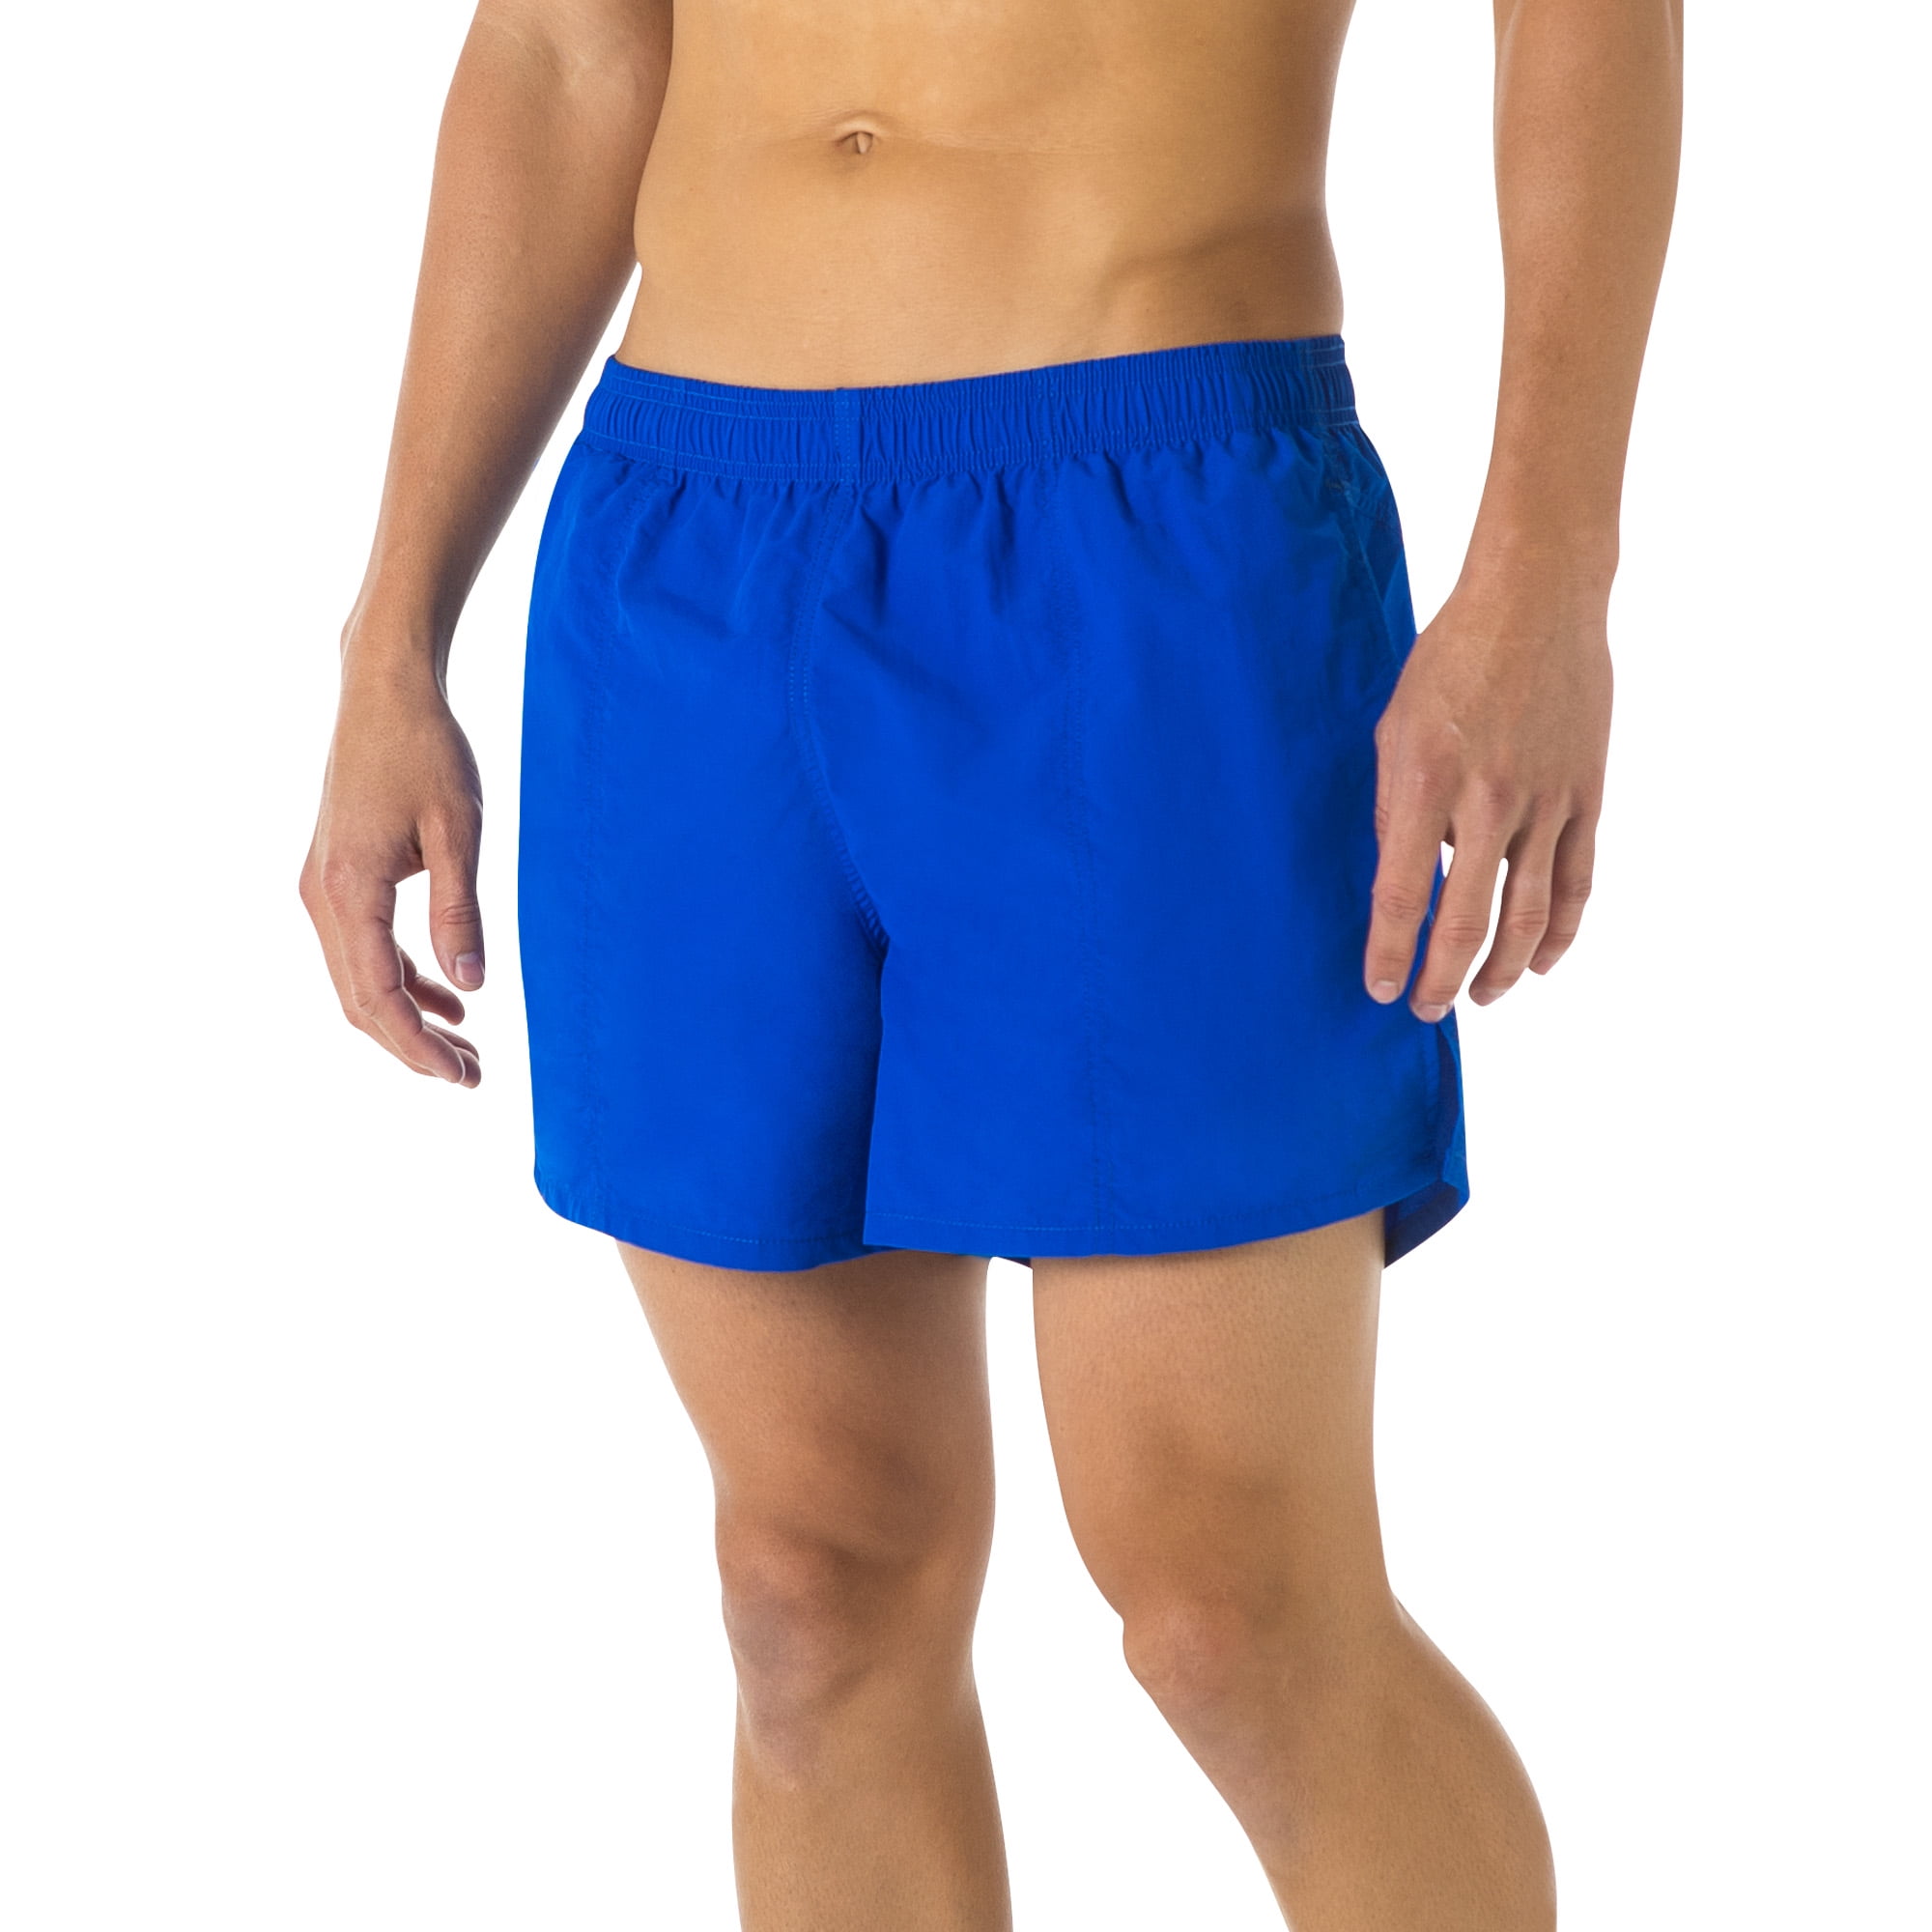 Dolfin Men's Solid Water Short in Royal, Size Small - Walmart.com